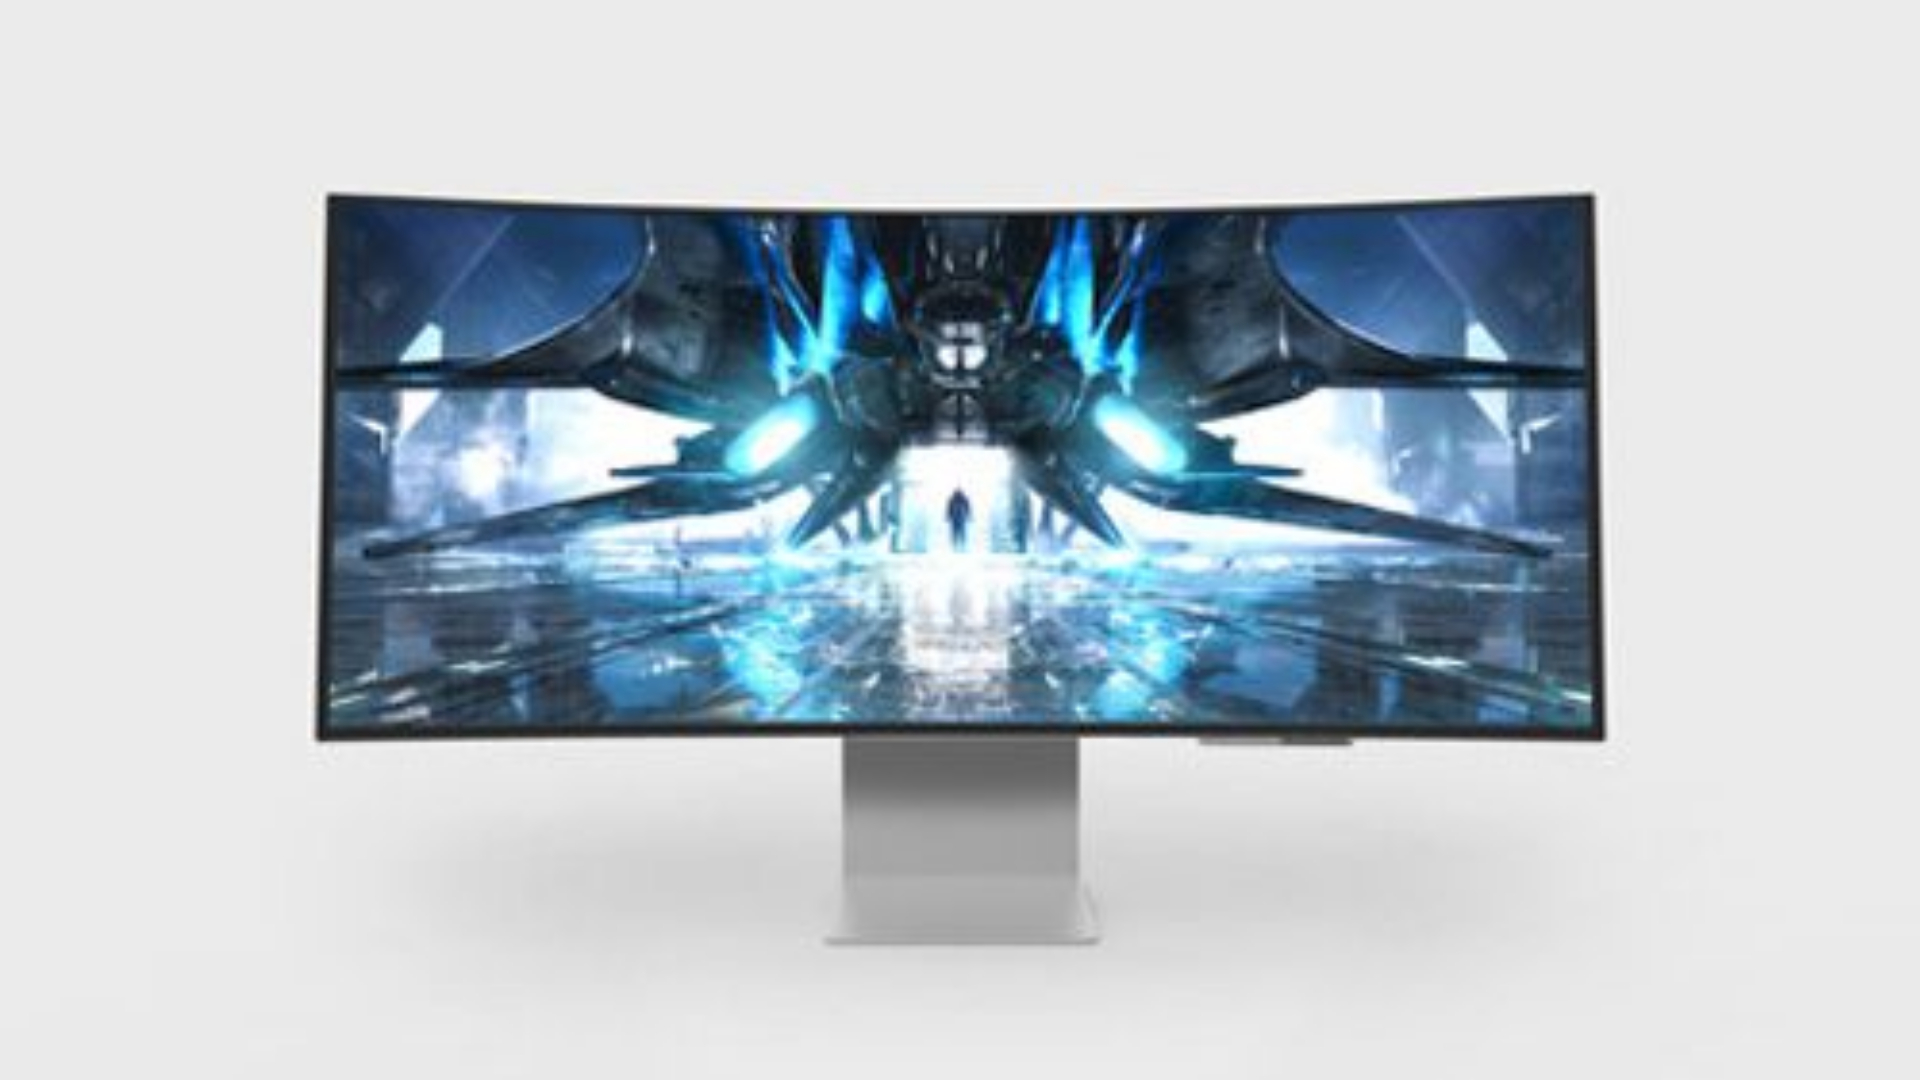  Quantum Dot OLED gaming monitors aren't just sci-fi nonsense, they're the future 